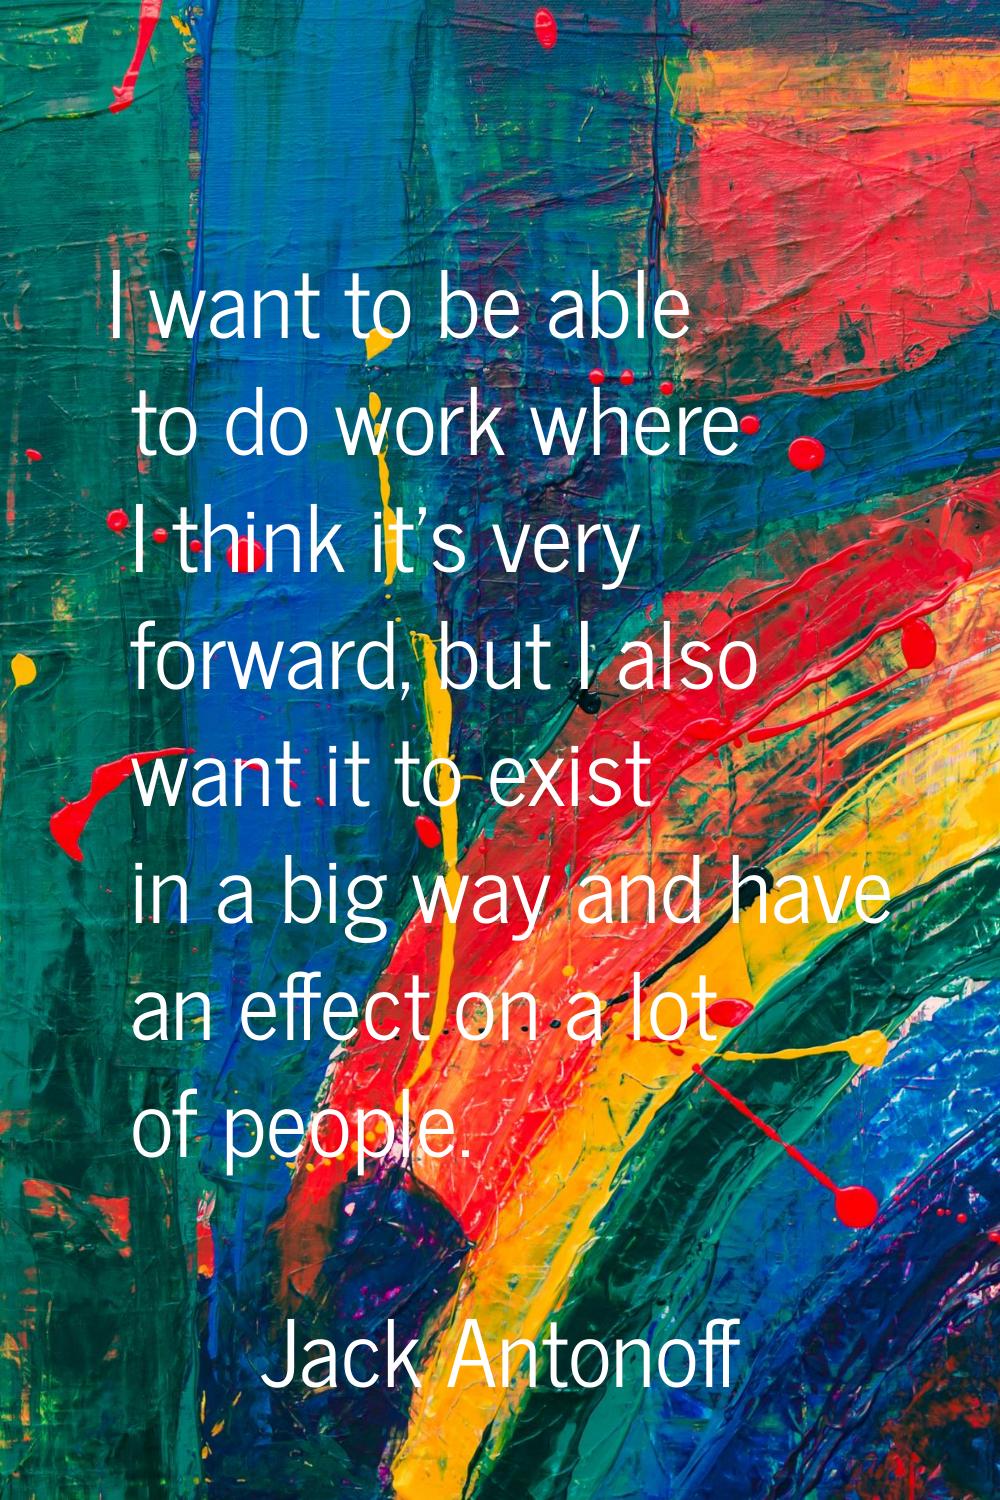 I want to be able to do work where I think it's very forward, but I also want it to exist in a big 